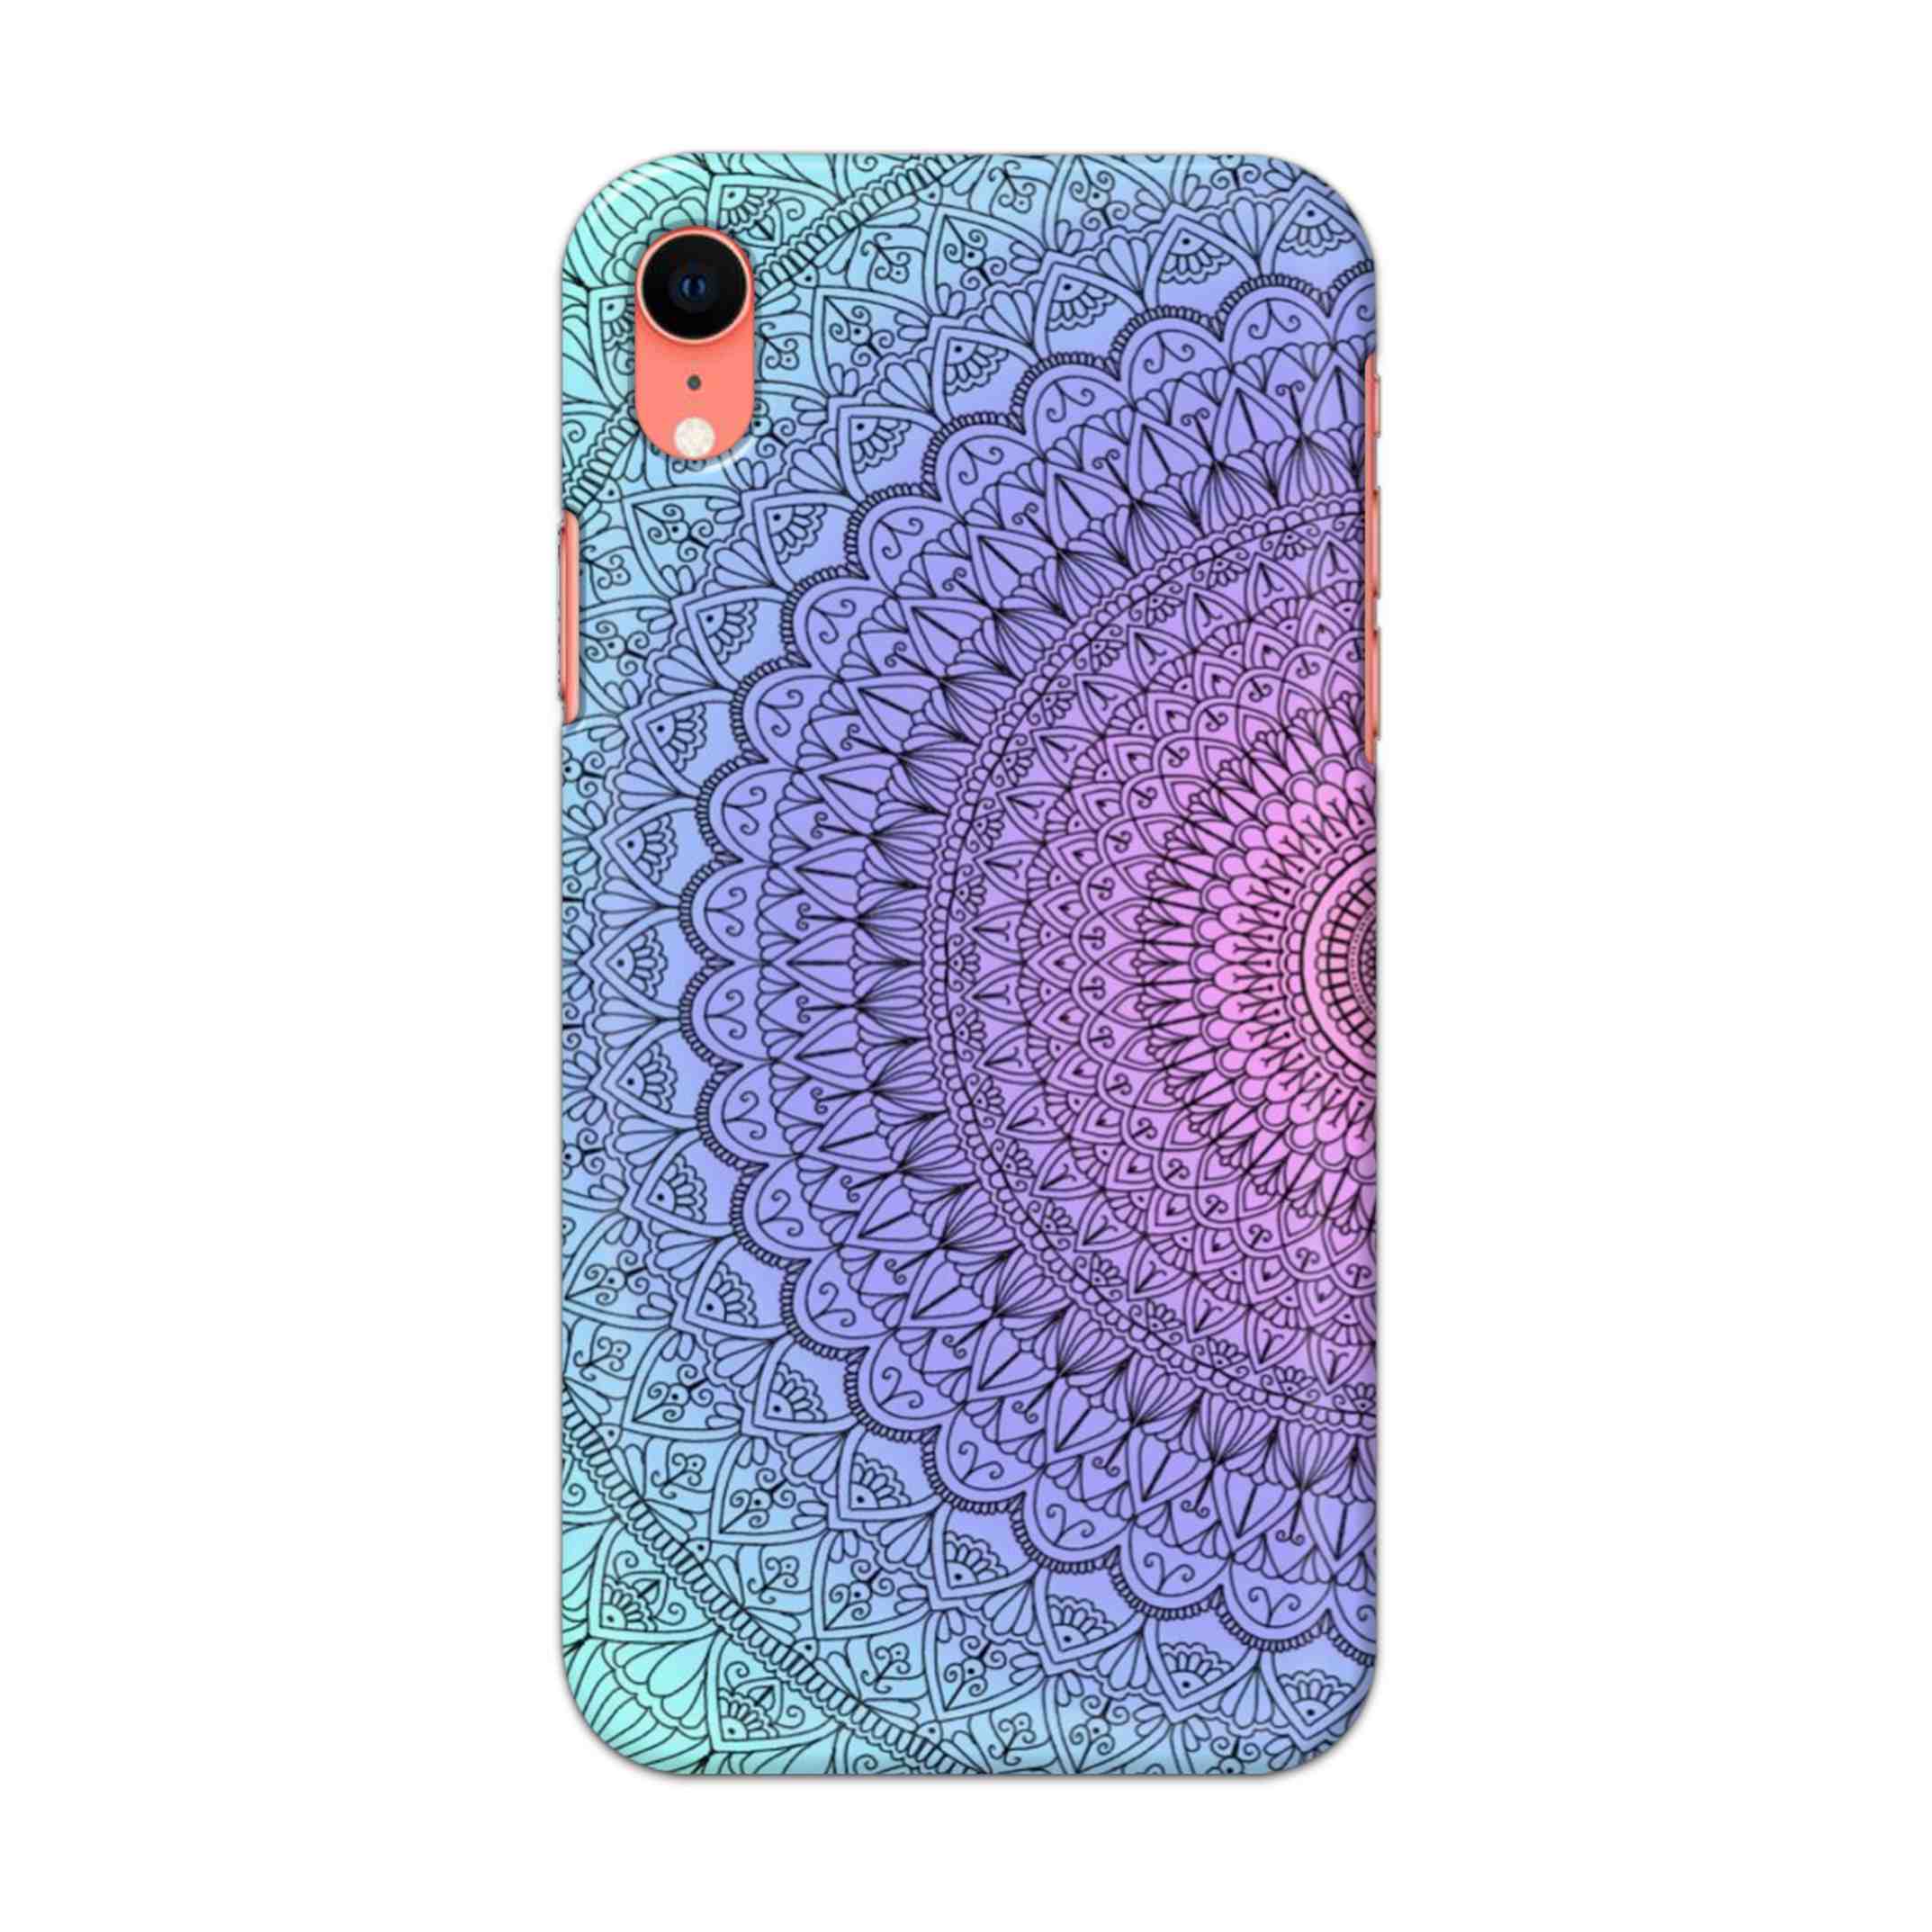 Buy Colourful Mandala Hard Back Mobile Phone Case/Cover For iPhone XR Online